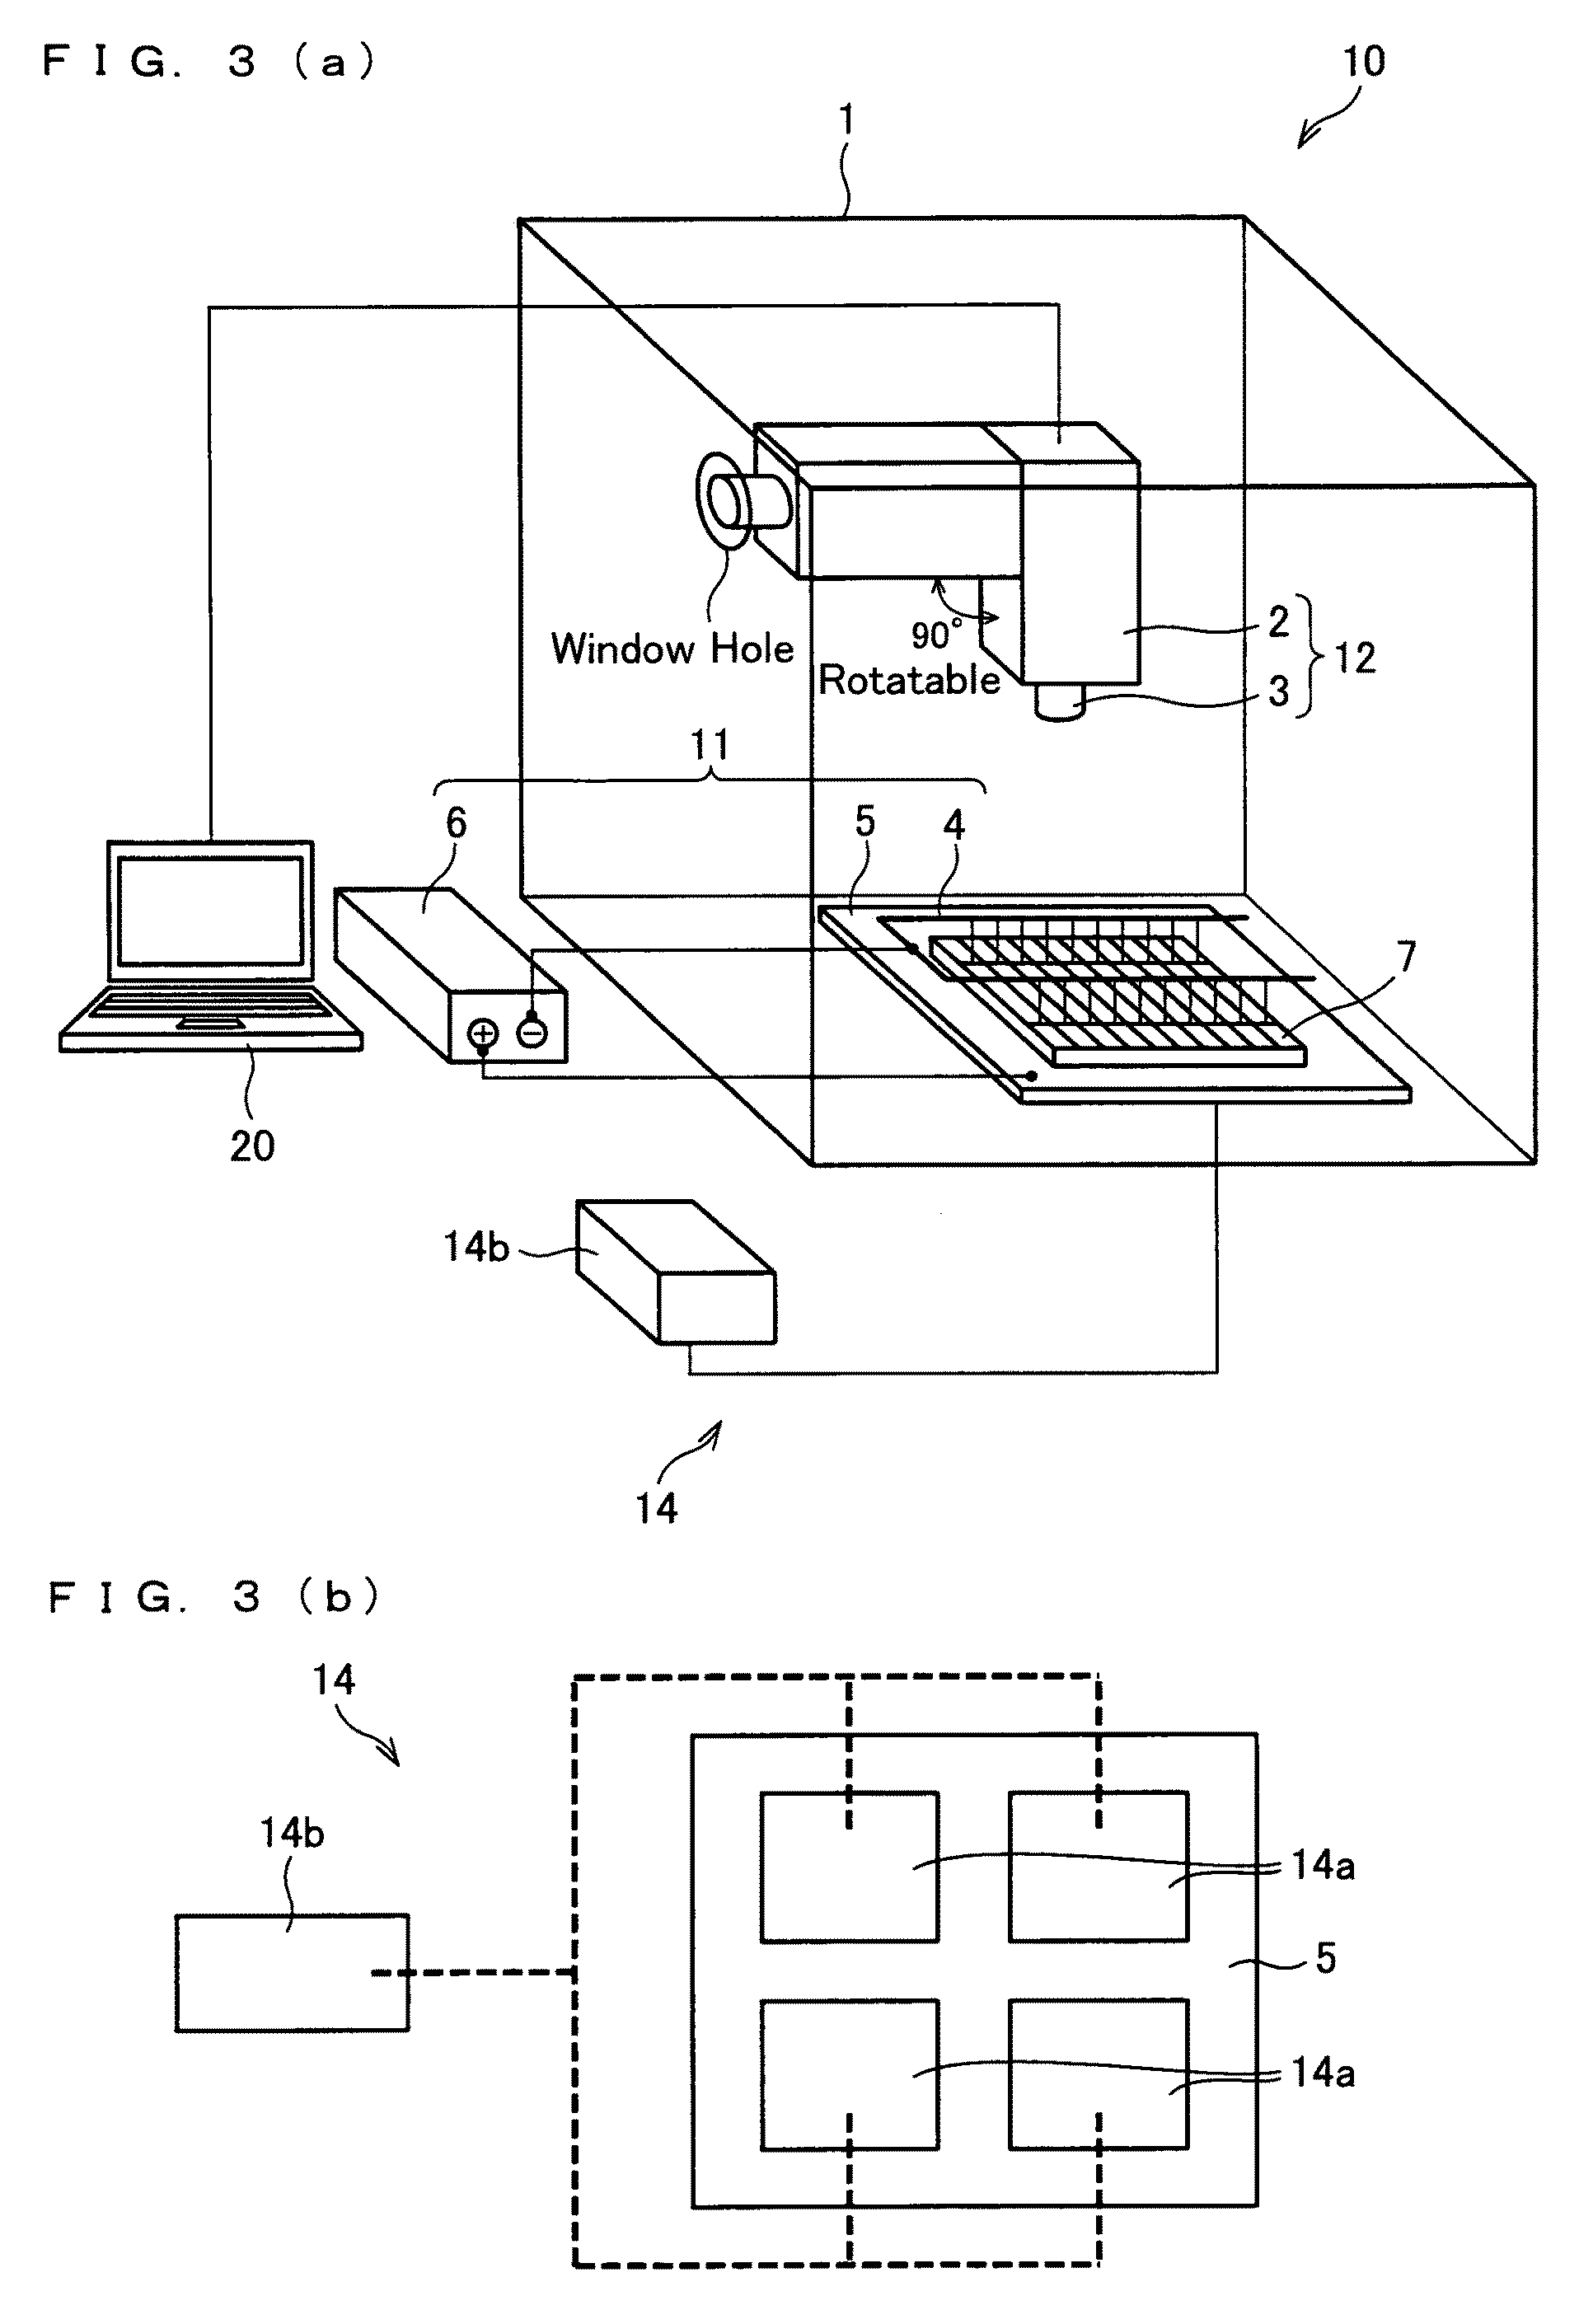 Method and apparatus for testing and evaluating performance of a solar cell